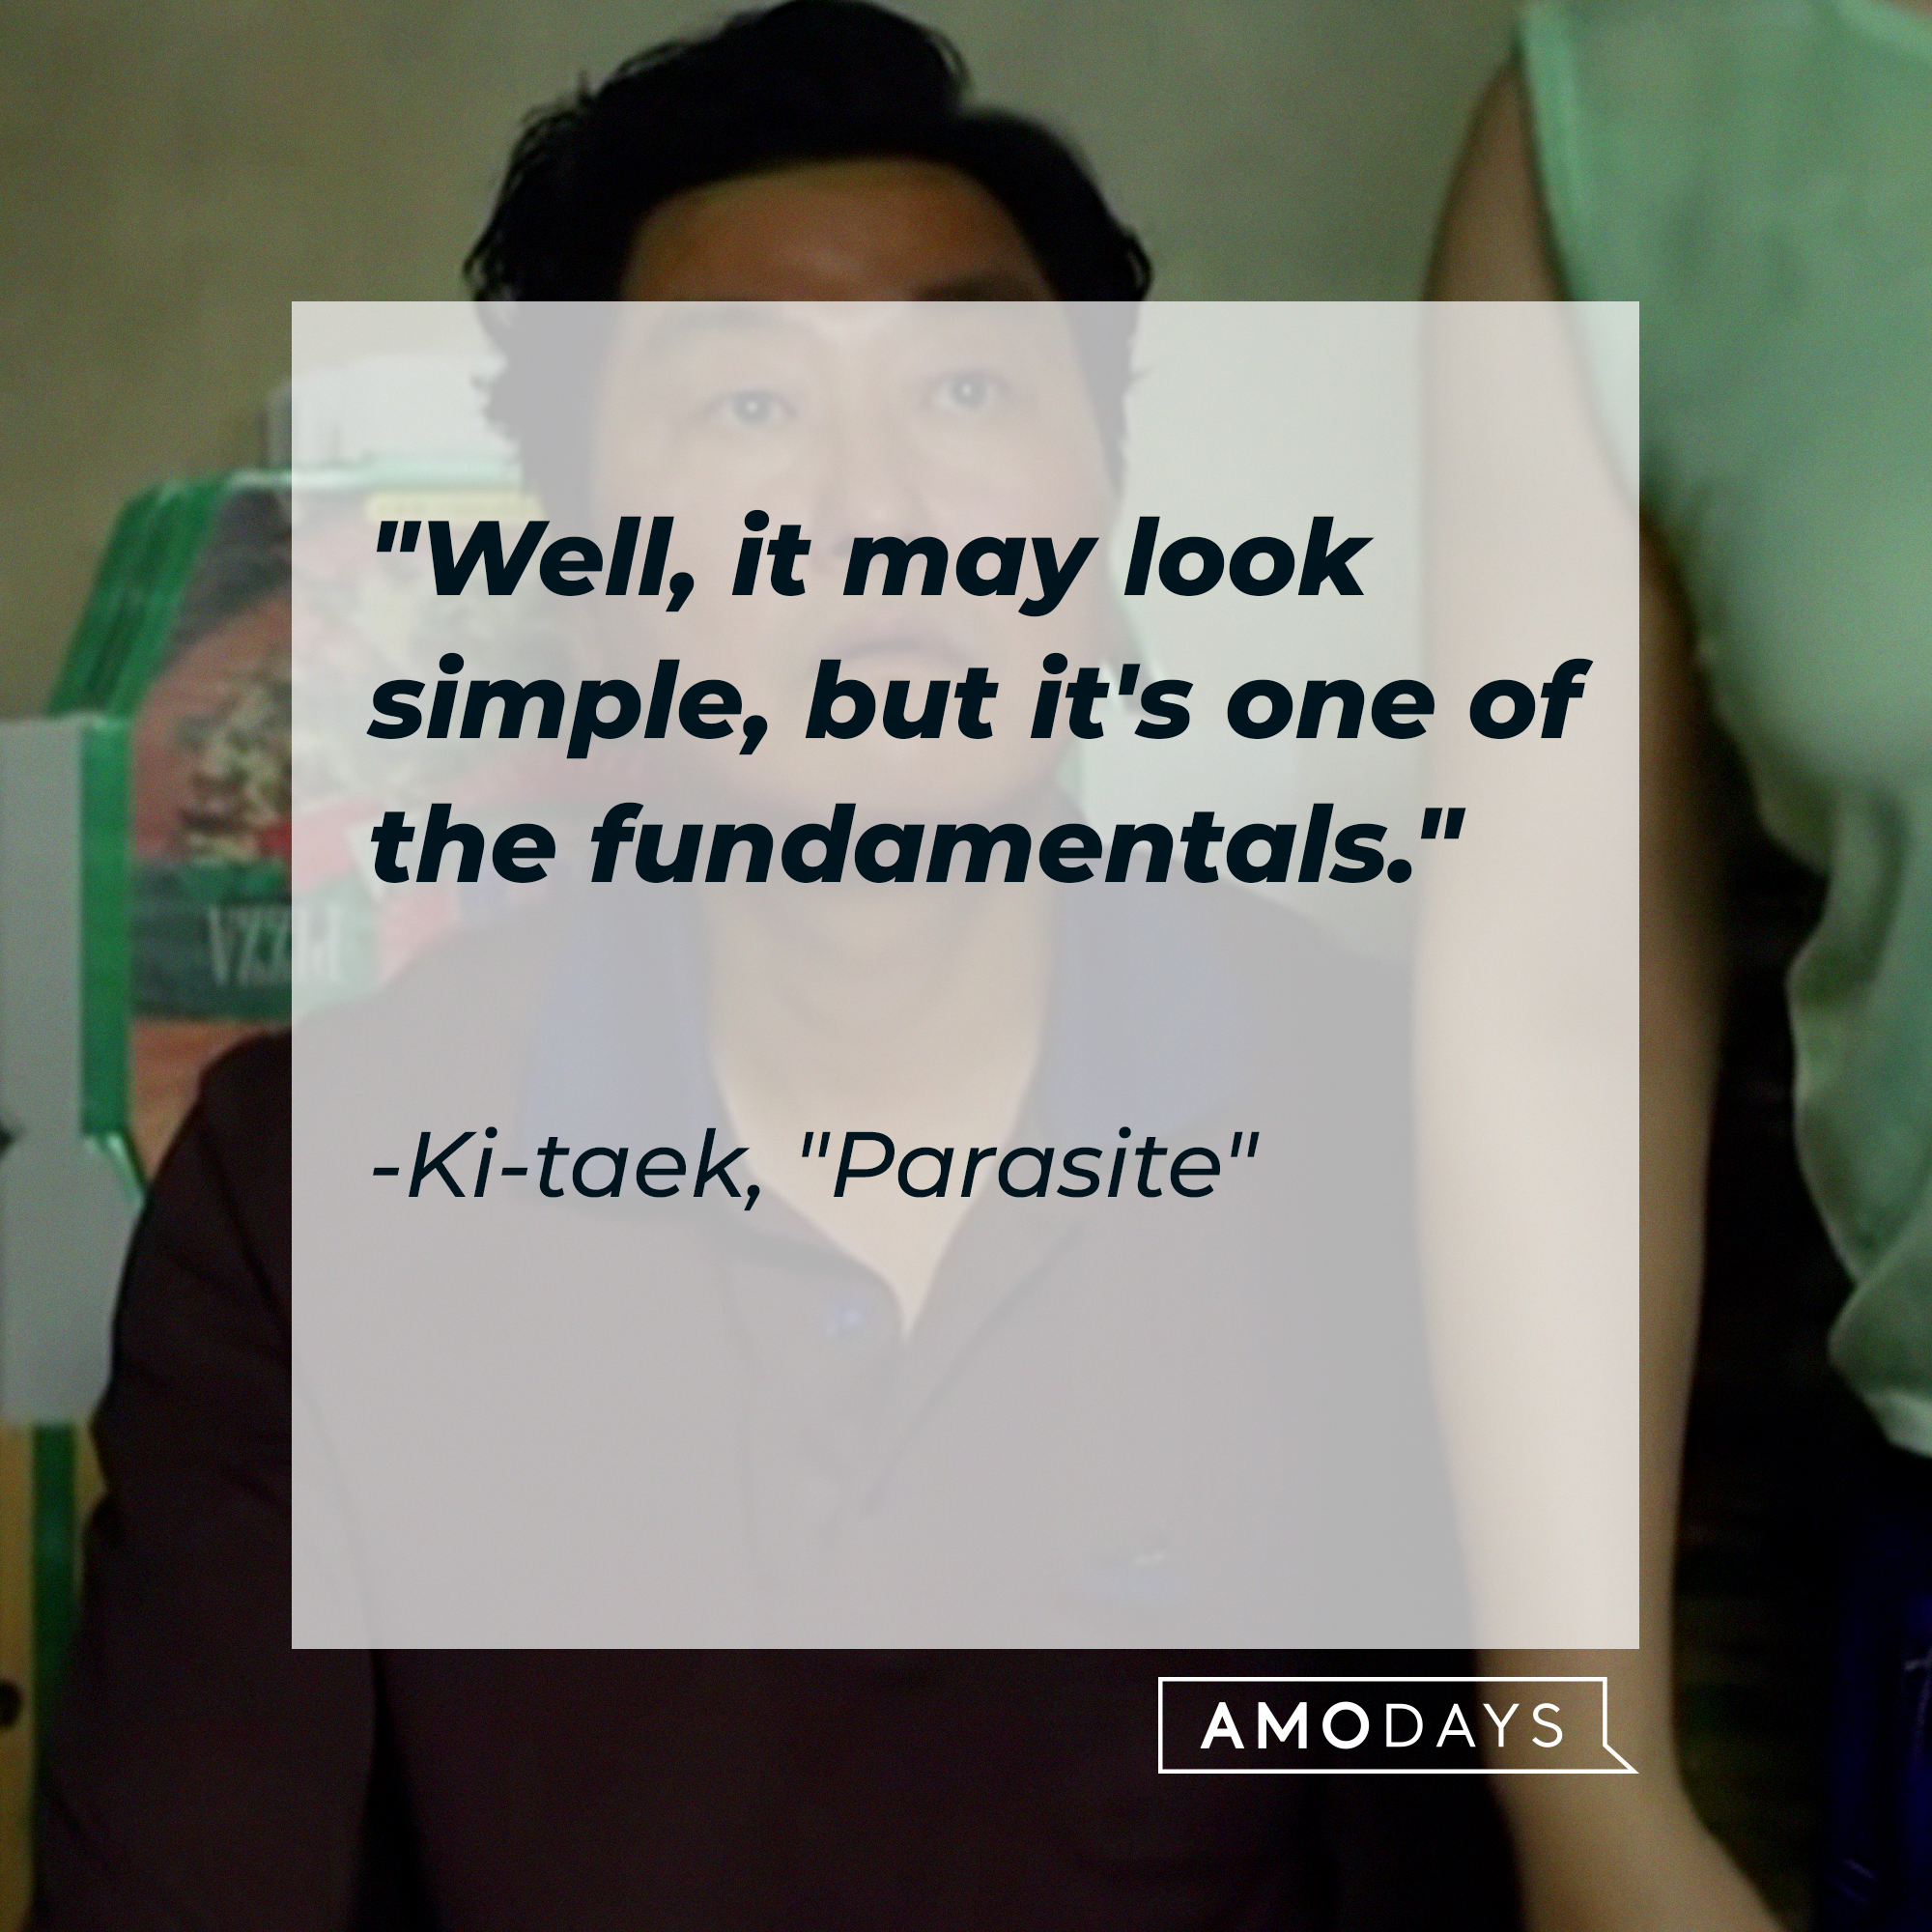 Ki-taek with his quote: "Well, it may look simple, but it's one of the fundamentals." | Source: Facebook.com/ParasiteMovie